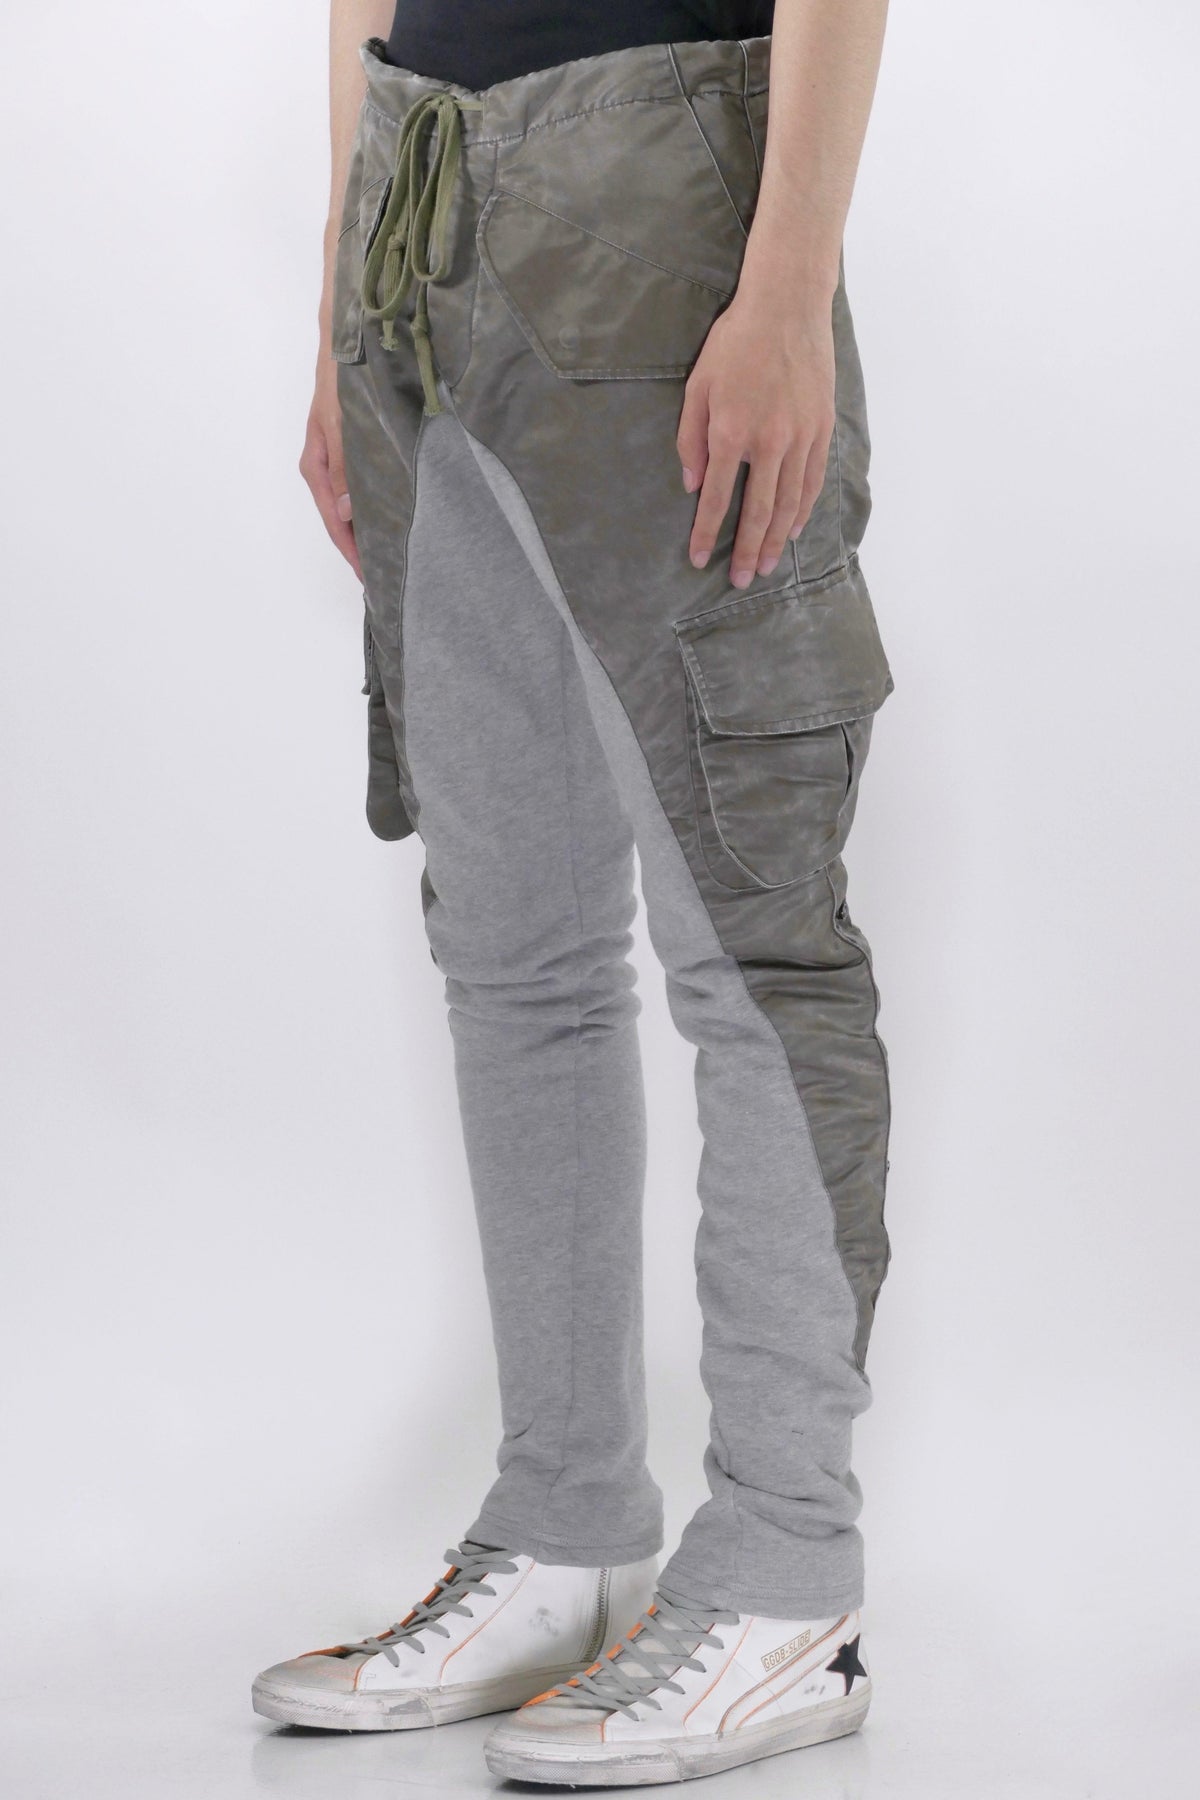 Greg Lauren Washed Satin 50 50 Pants - Army Grey - Due West